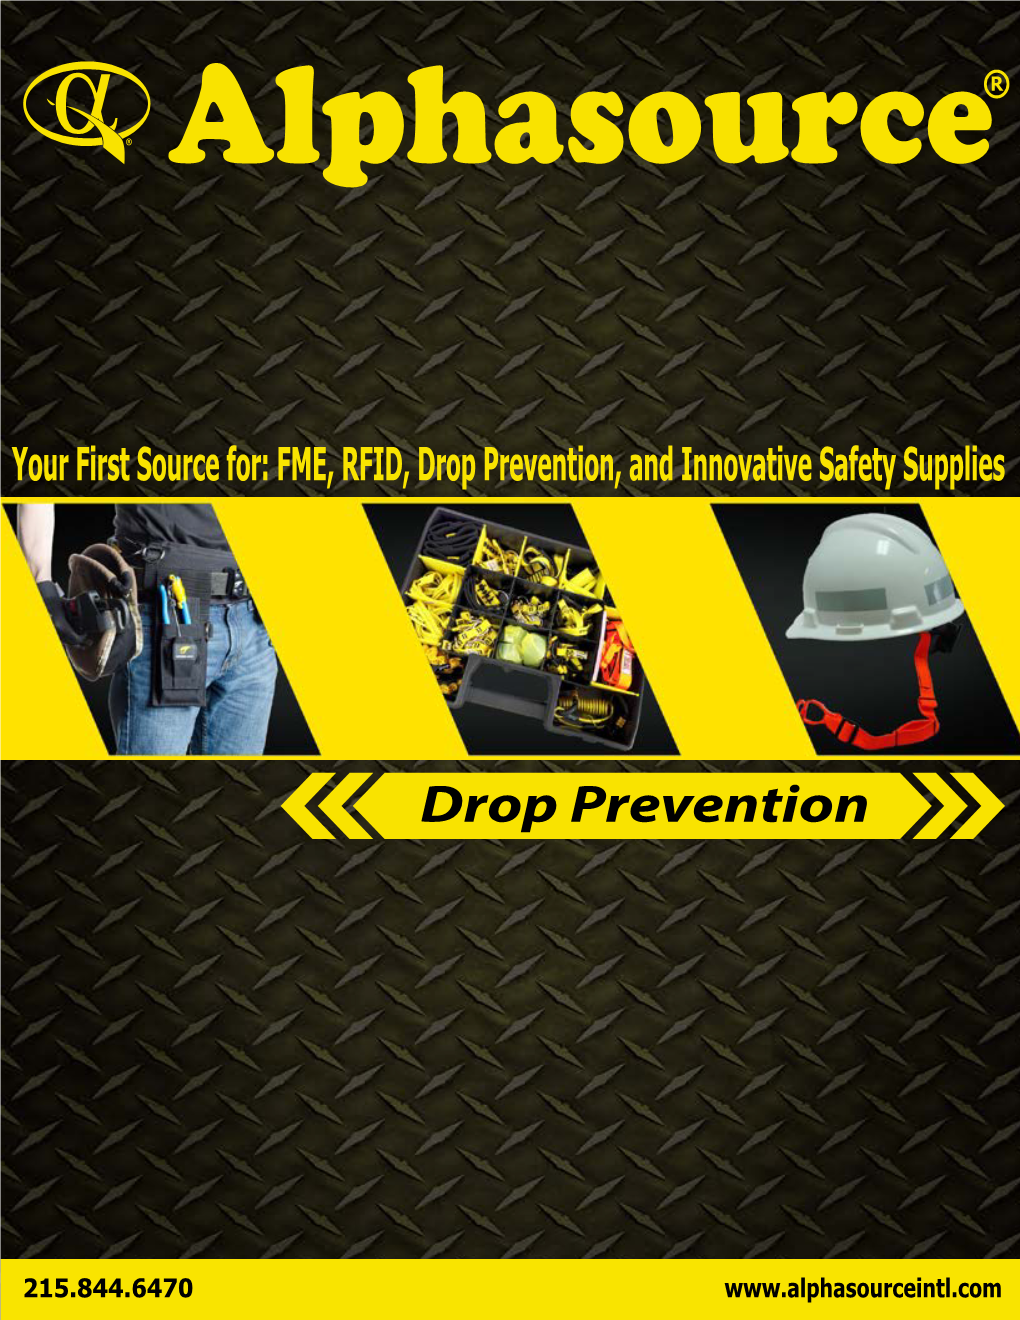 FME, RFID, Drop Prevention, and Innovative Safety Supplies